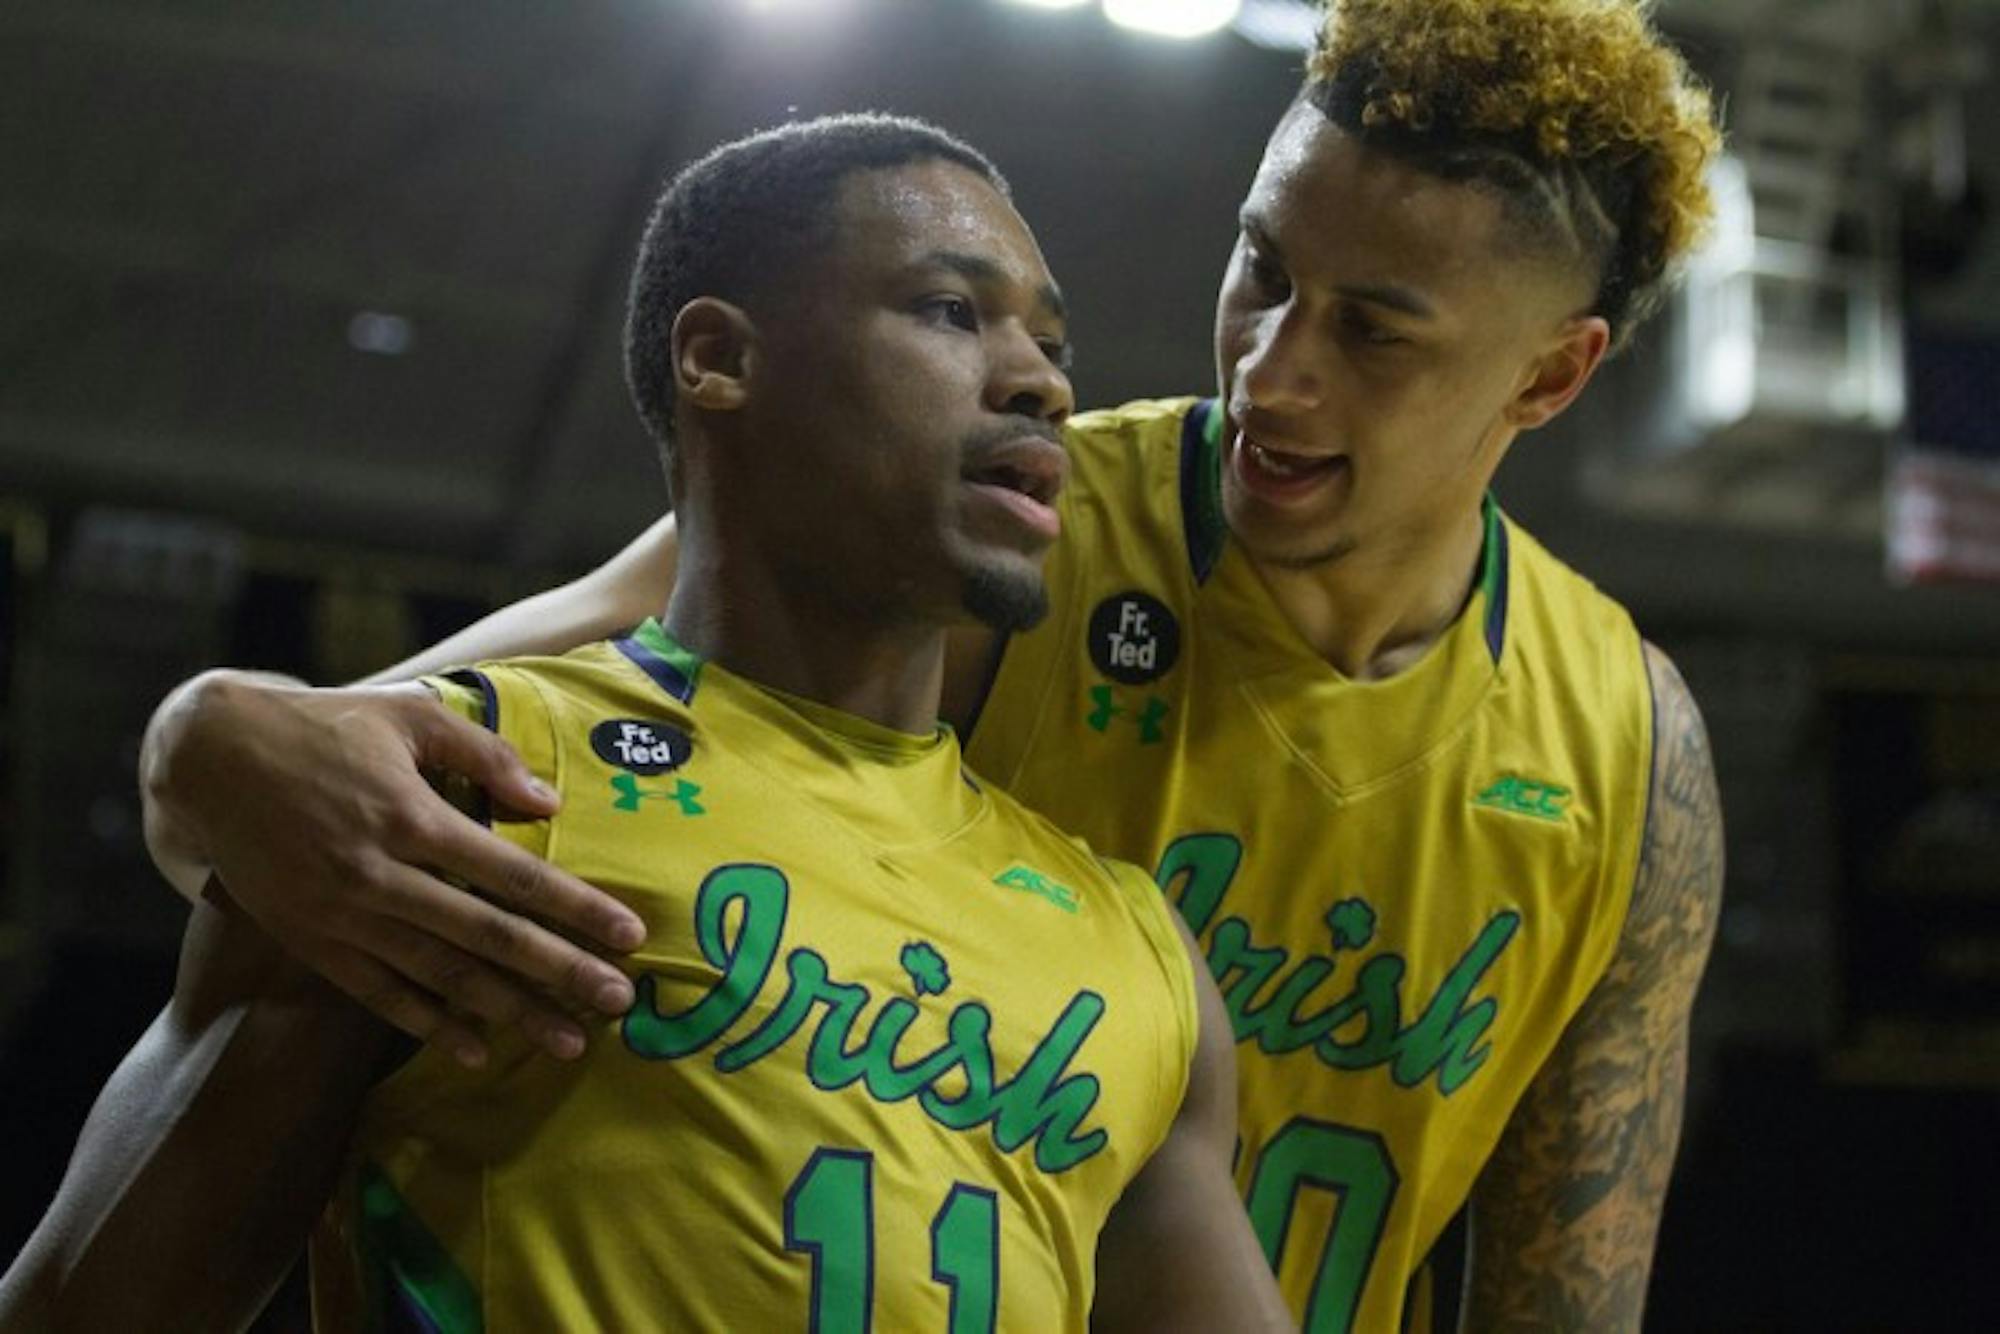 Irish junior guard Demetrius Jackson, left, and senior forward Zach Auguste talk following a play in Notre Dame’s 80-76 win over No. 2 North Carolina on Saturday night at Purcell Pavilion.